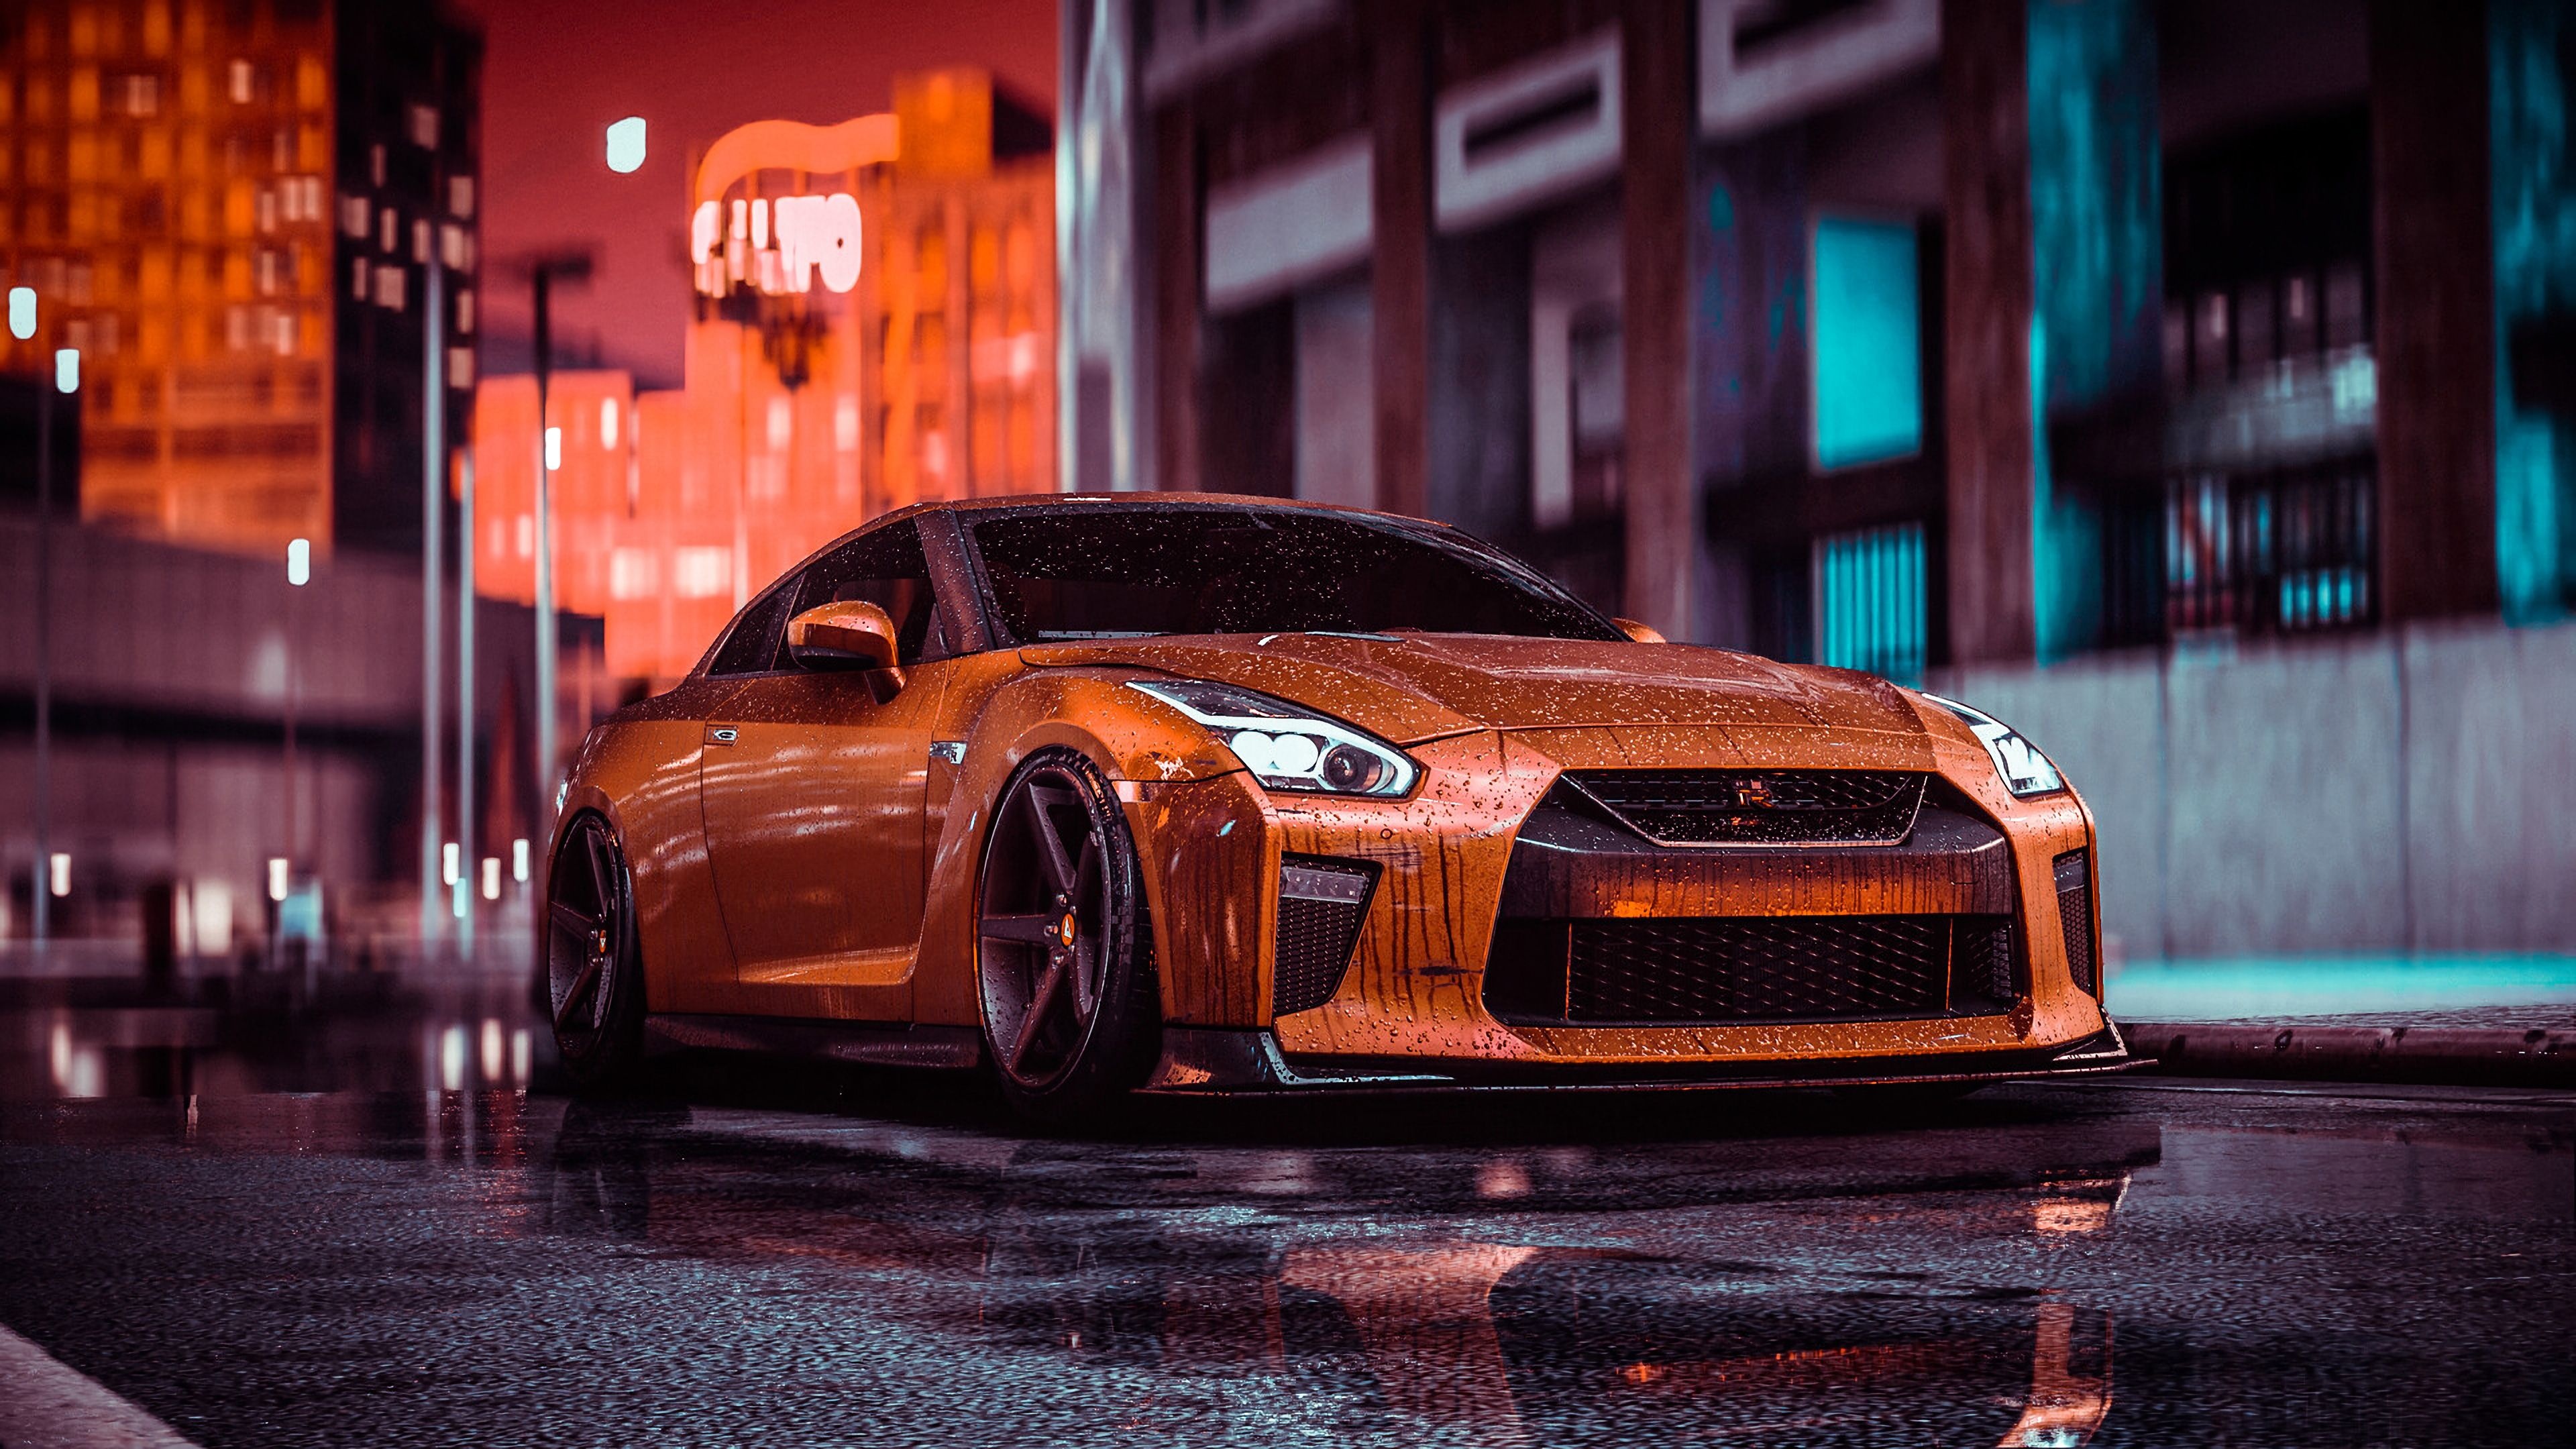 Nissan GT-R, NFS front, Nissan wallpapers, Need For Speed, 3840x2160 4K Desktop